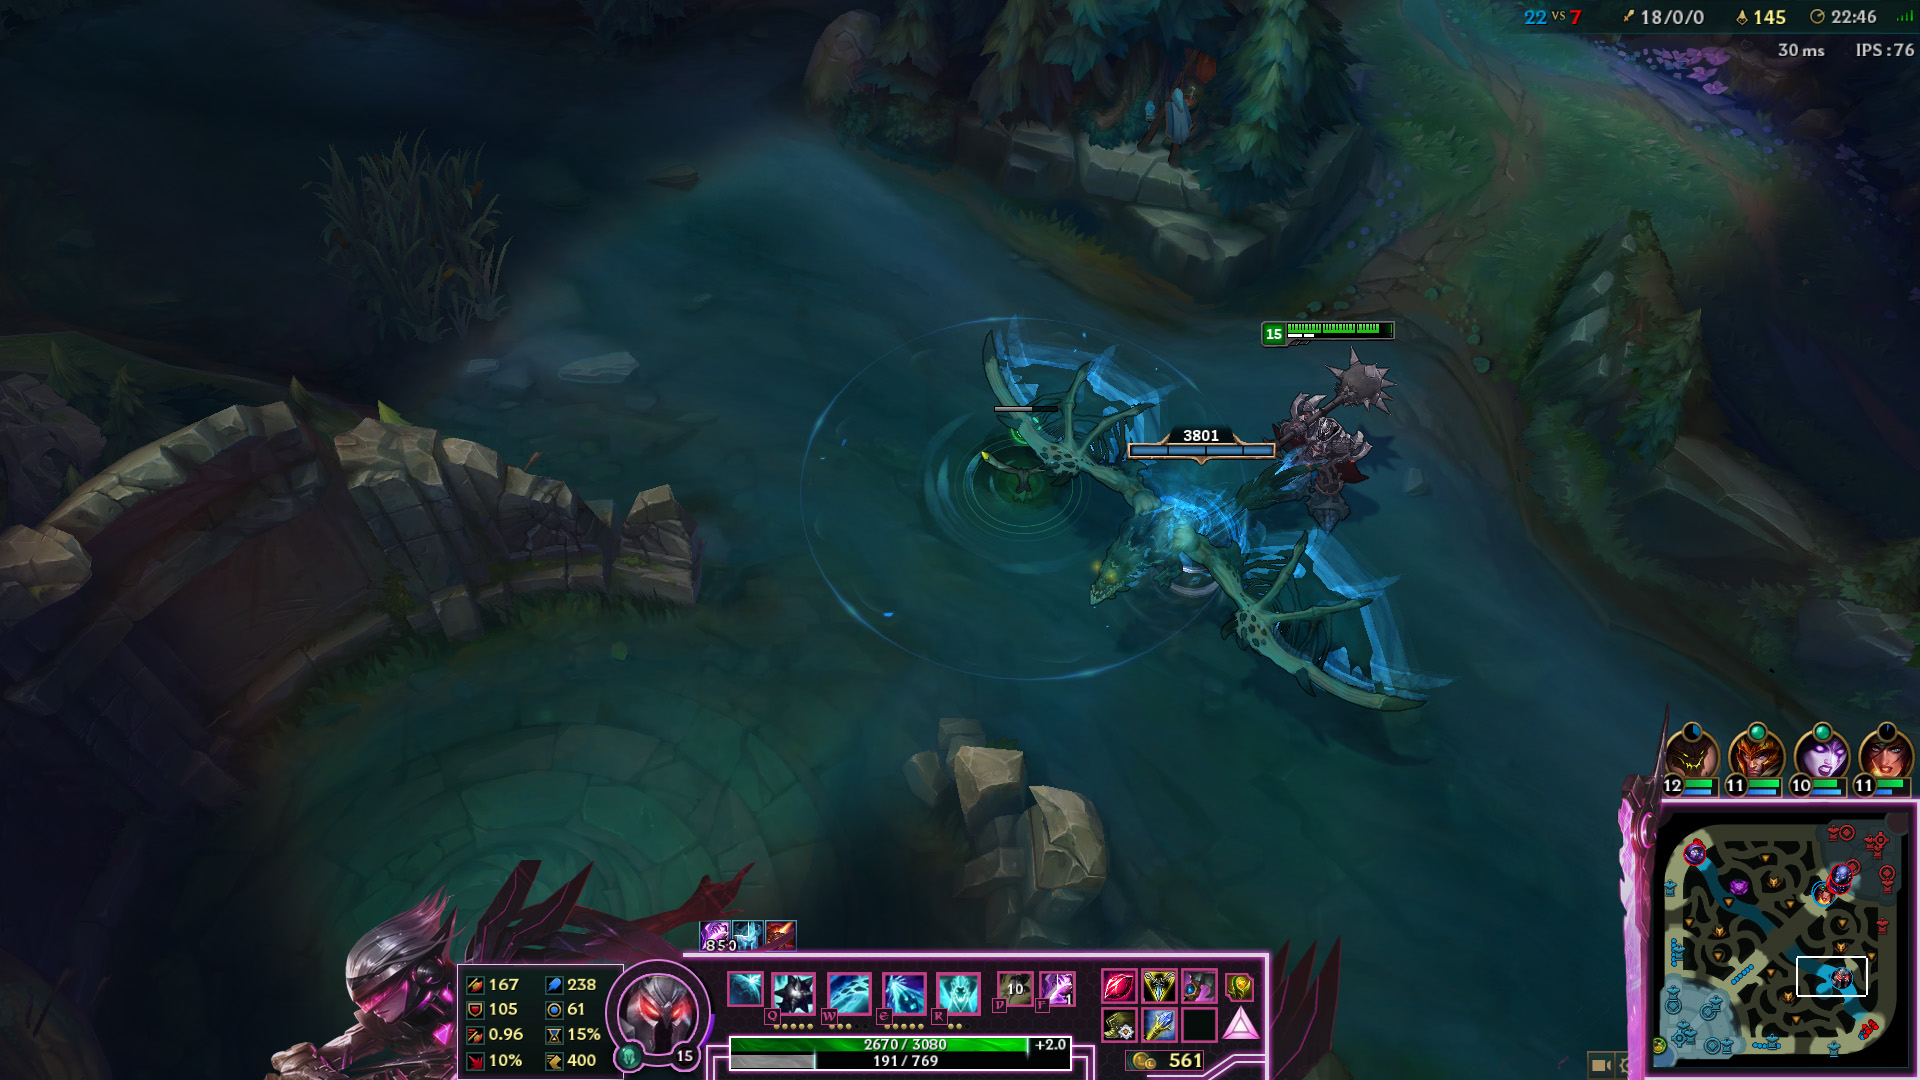 Project Fiora Lol Streaming Overlay By Lol0verlay